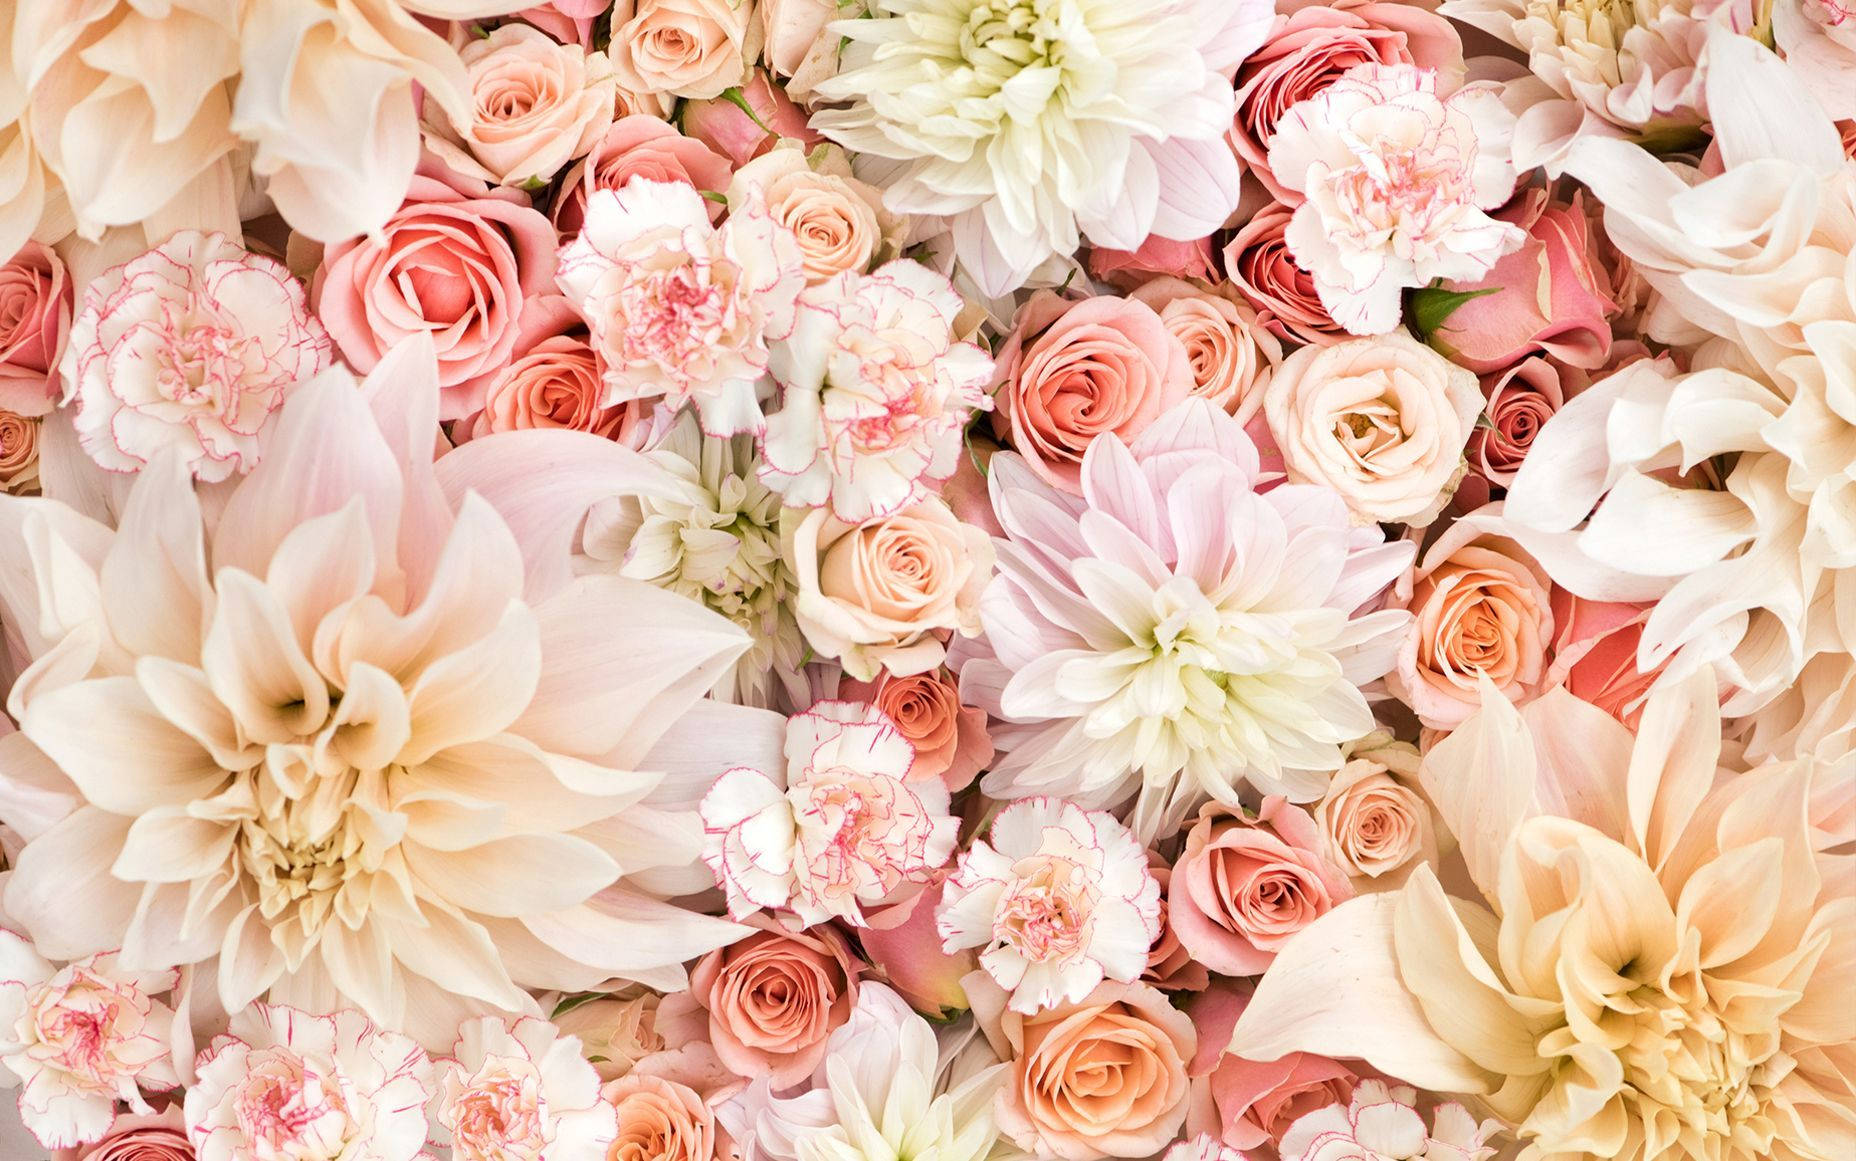 33 Cute Spring Wallpaper Ideas  Hello Spring Wallpaper for iPhone I Take  You  Wedding Readings  Wedding Ideas  Wedding Dresses  Wedding Theme